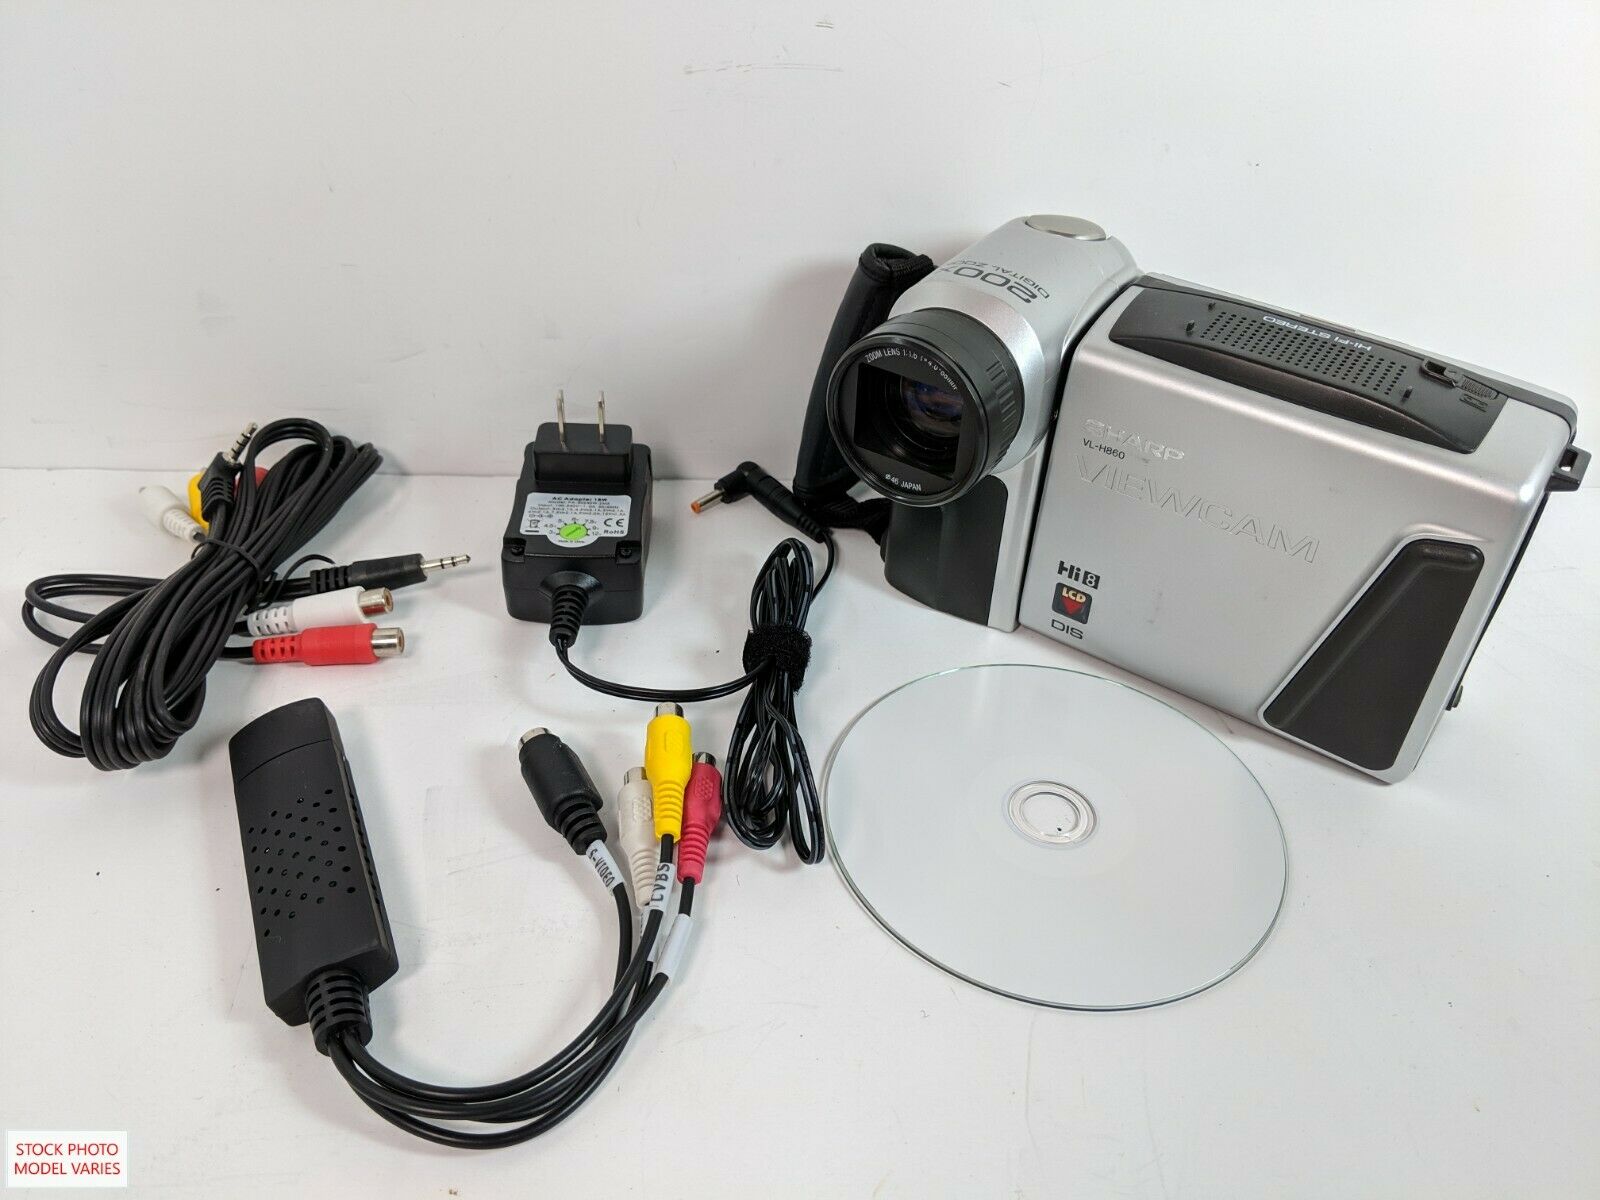 Sharp Viewcam 8mm Hi8 Camcorder For Tape Transfer To Computer Usb Capture Device